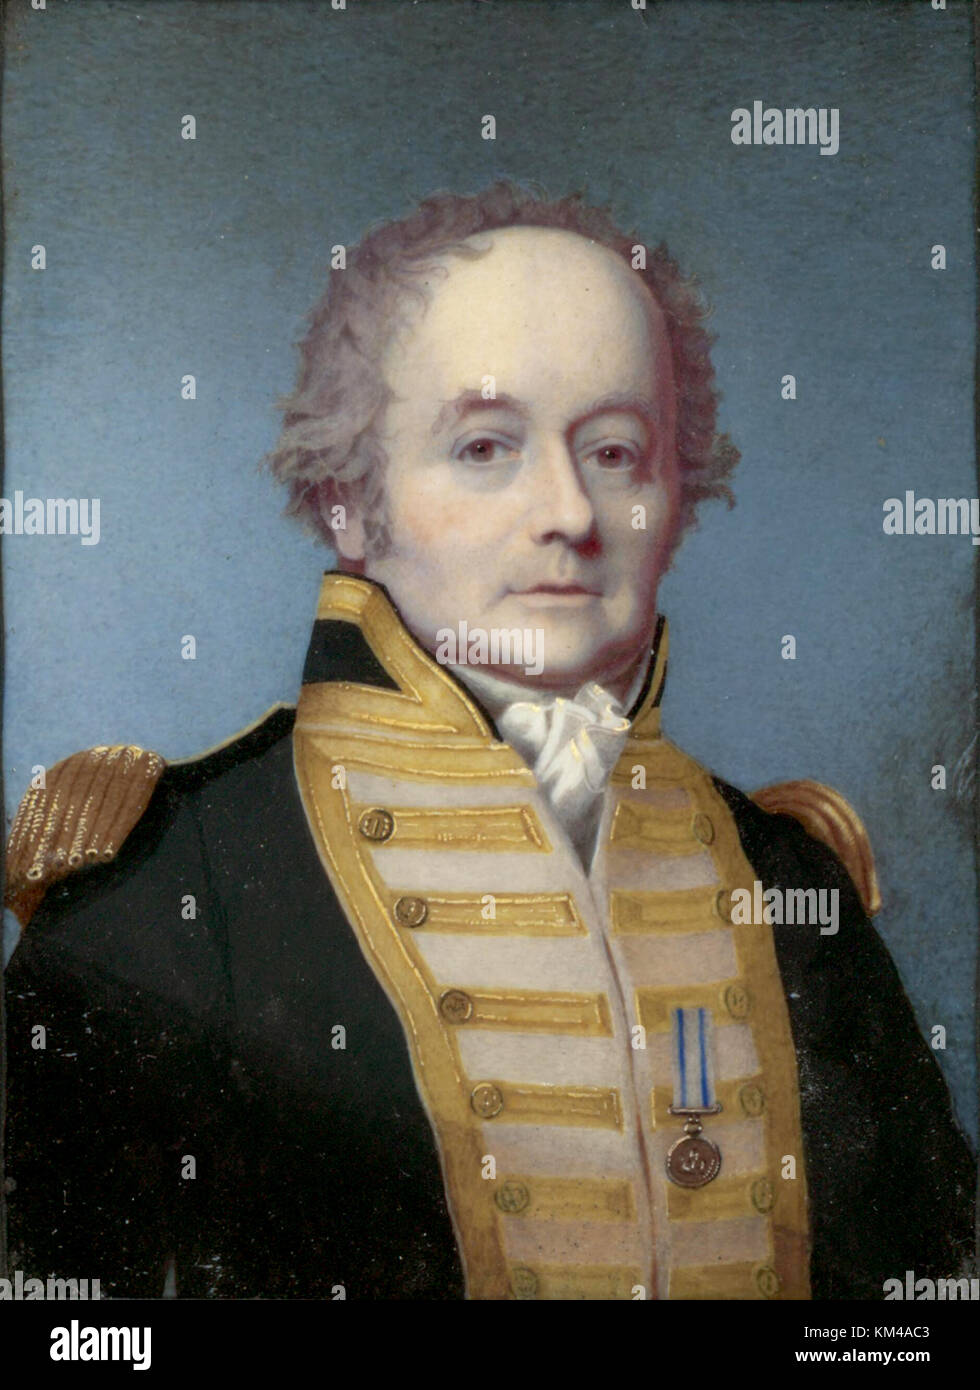 Captain William Bligh, Vice-Admiral William Bligh, officer of the British Royal Navy Stock Photo